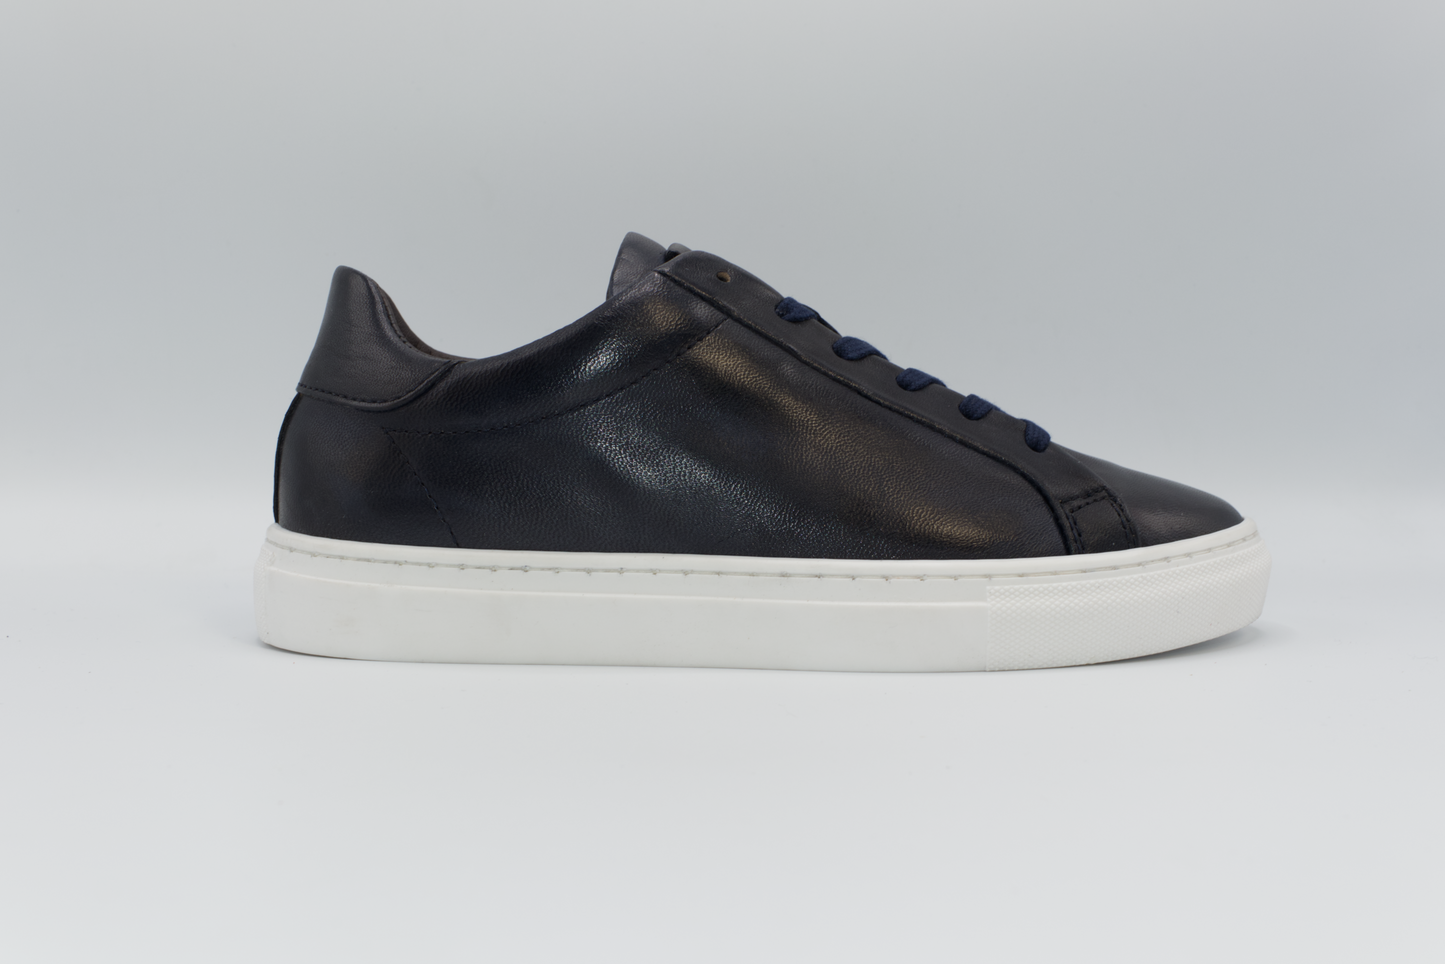 Shop Handmade Italian Leather Sneaker in Navy Blue or browse our range of hand-made Italian sneakers for men in leather or suede. We deliver to the USA and Canada & offer multiple payment plans as well as accept multiple safe & secure payment methods. Coraf02